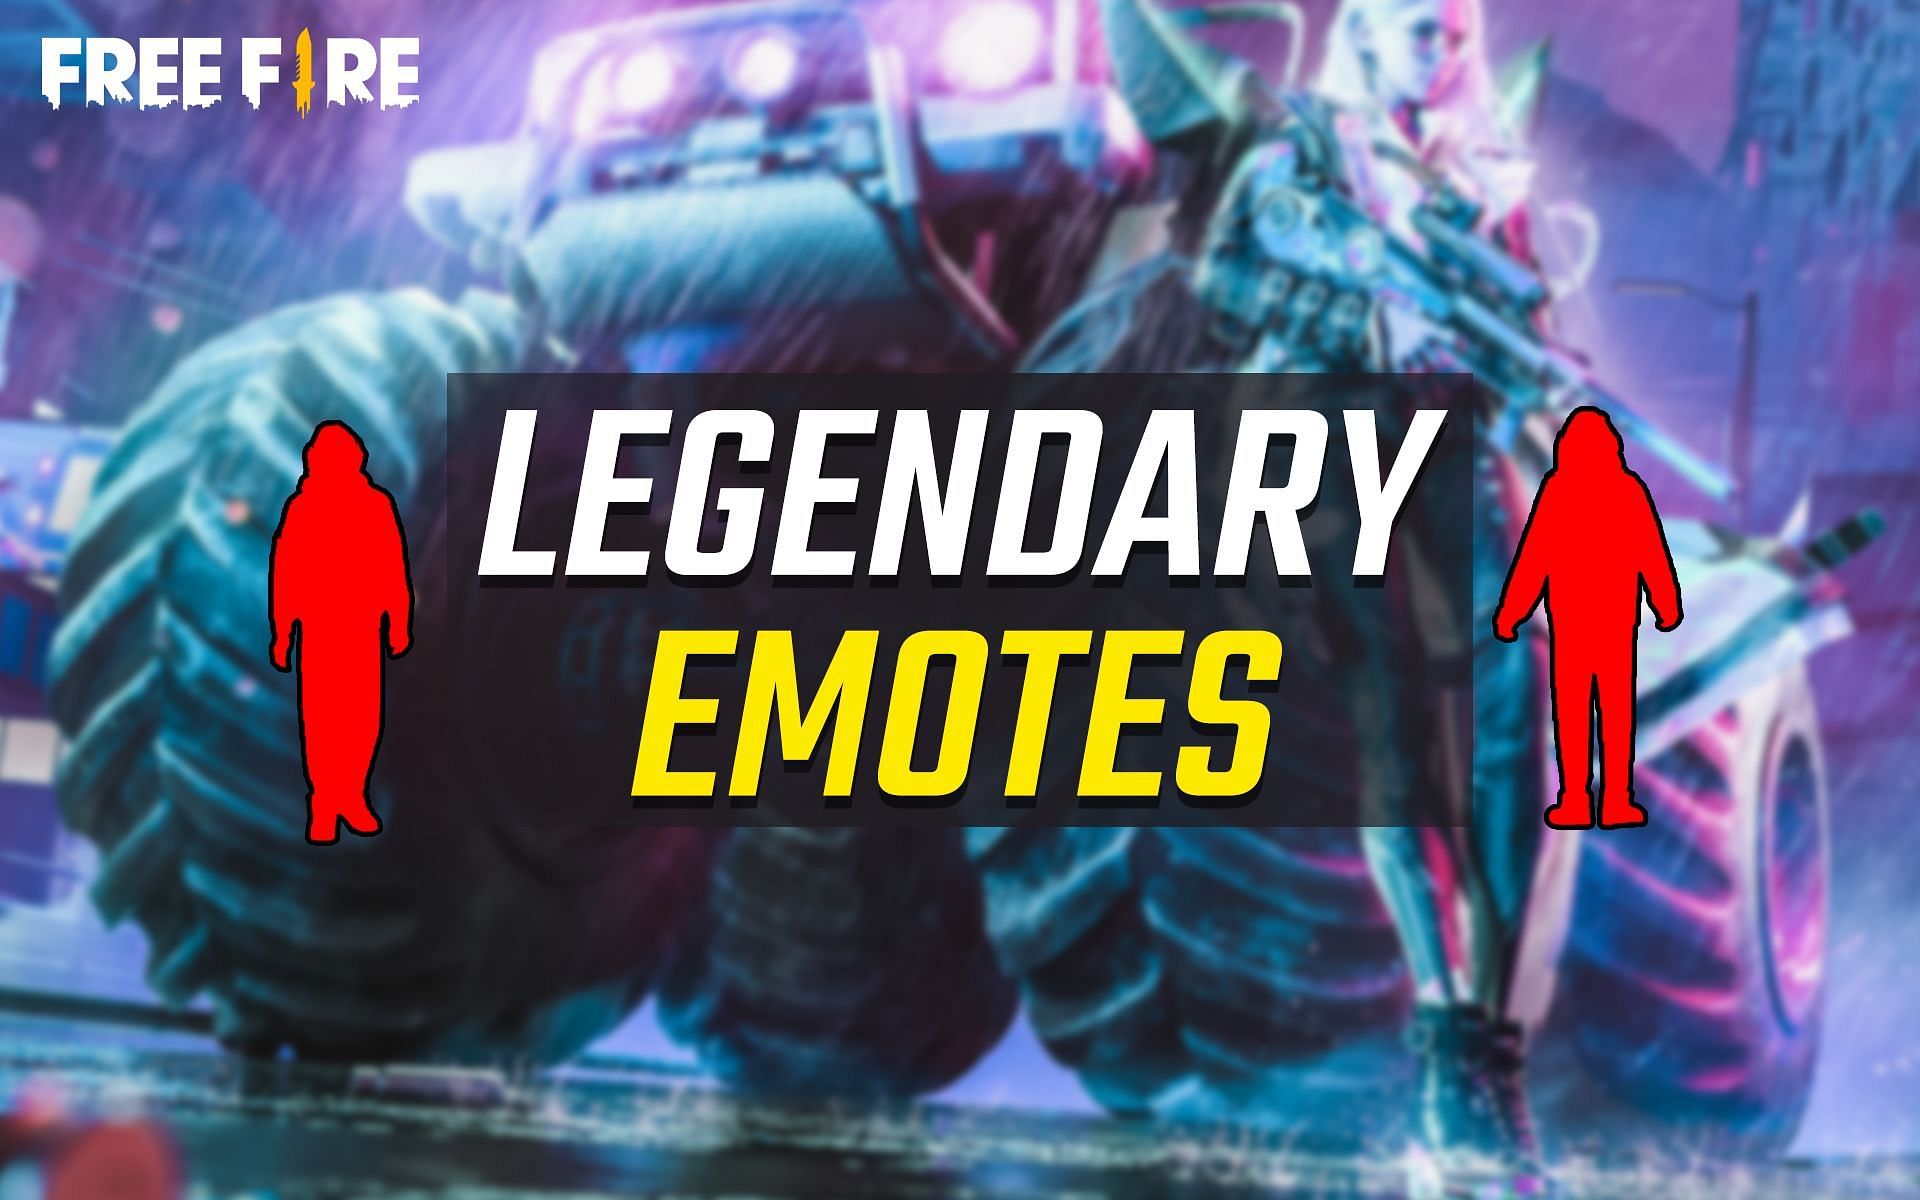 Some of the best Legendary emotes in Free Fire right now (Image via Sportskeeda)